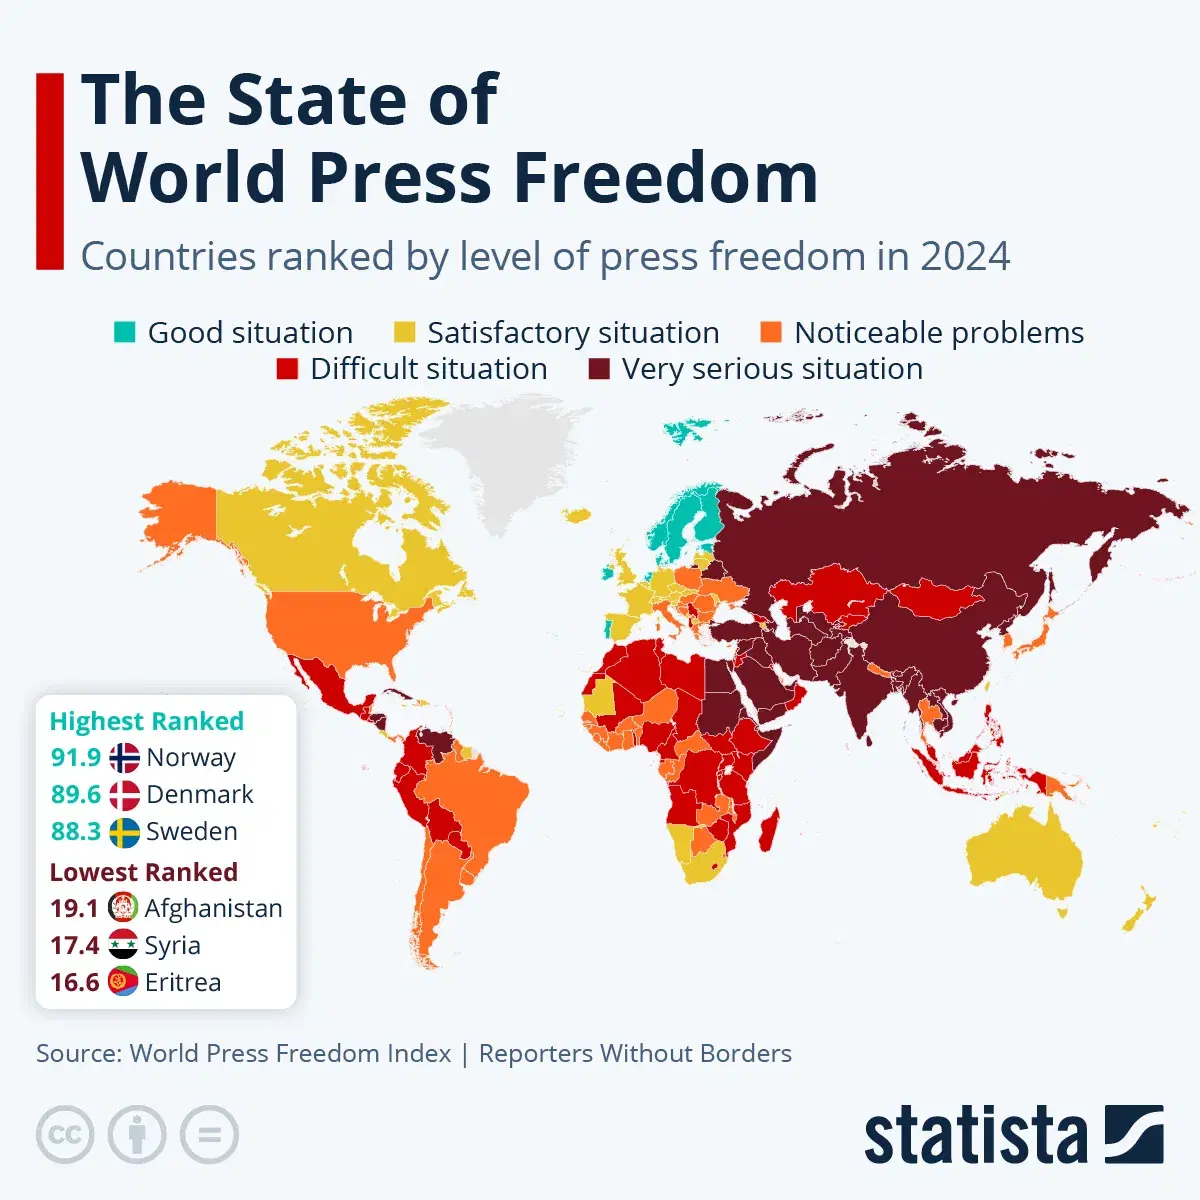 The State of World Press Freedom